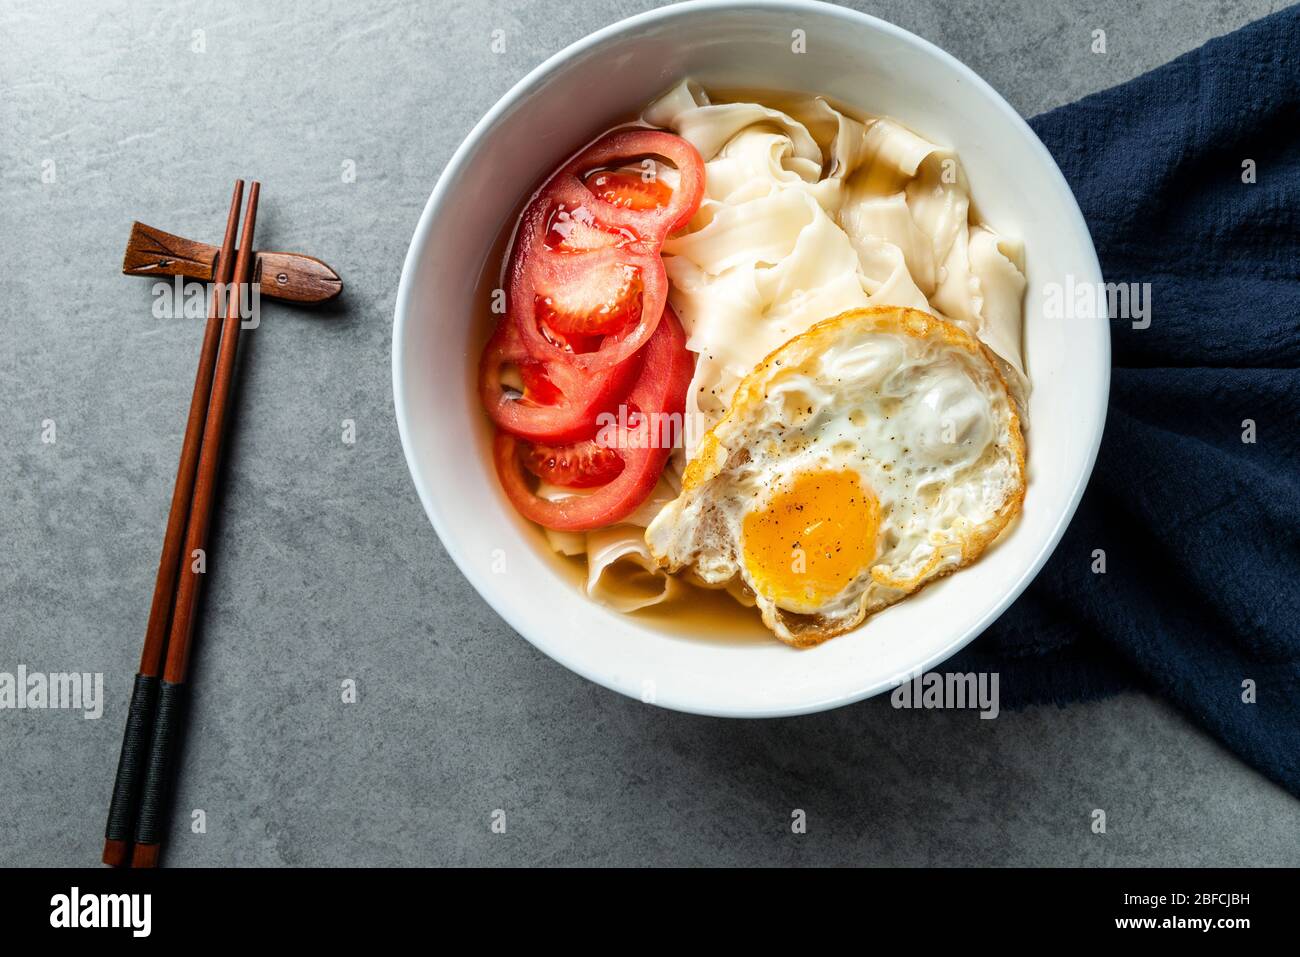 Chinese Traditional noodles with tomatoes and eggs Stock Photo